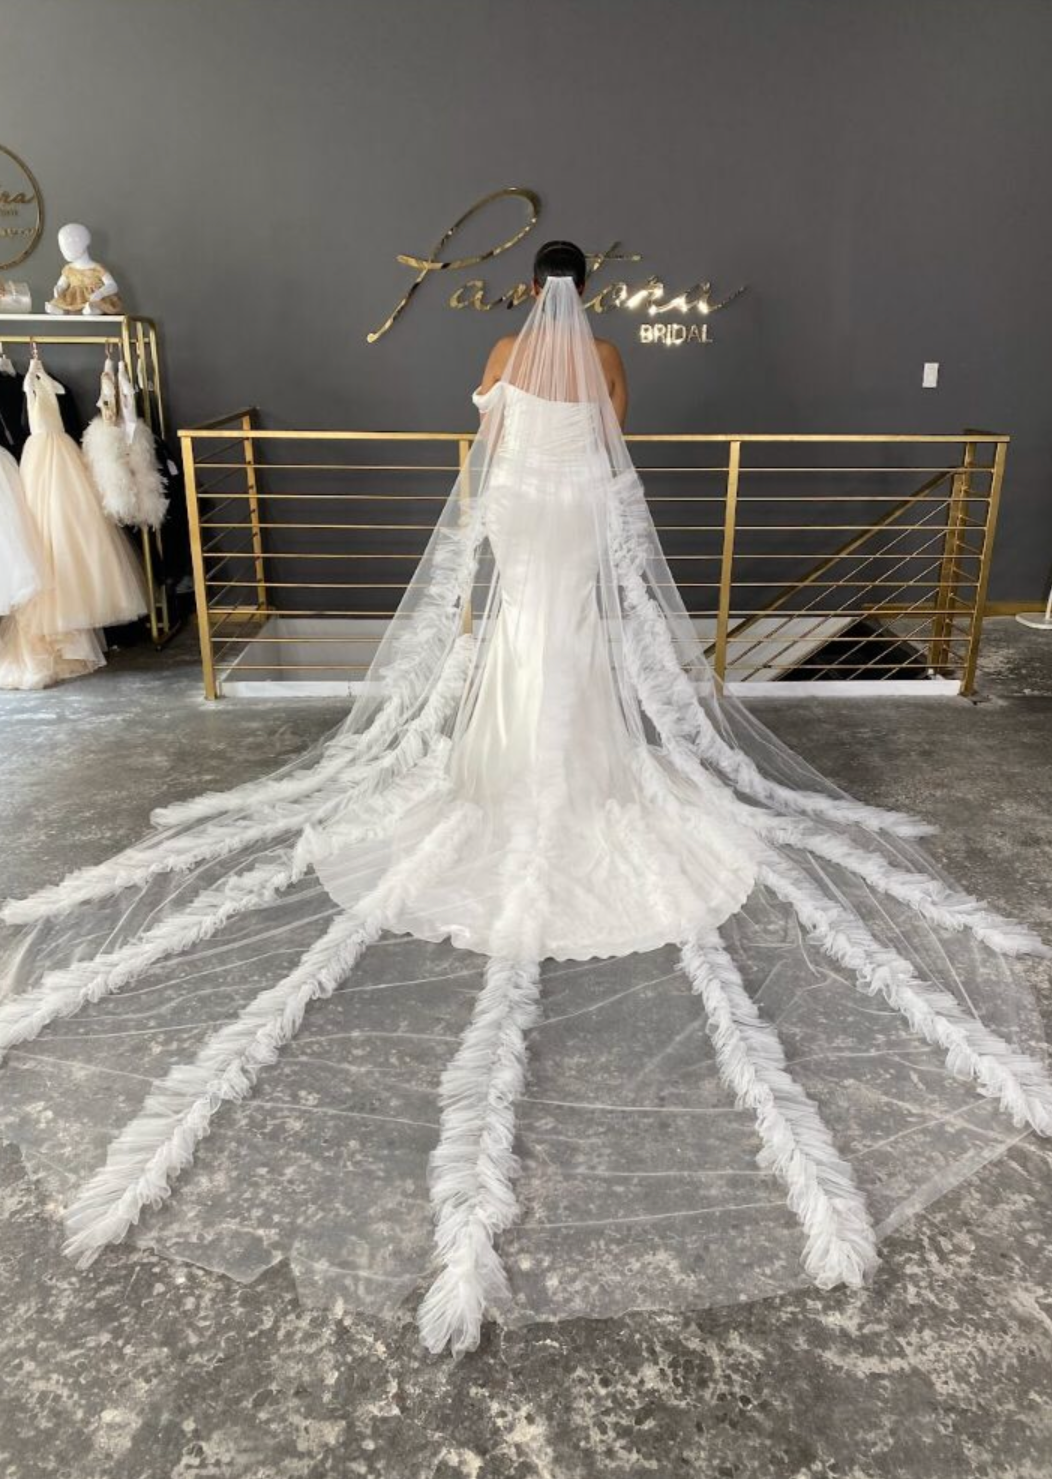 Beautiful cathedral length wedding veil for bride shown in a bridal store. Tulle veil features beautiful ruffle detailing that cascades down the veil for a dramatic finish. 